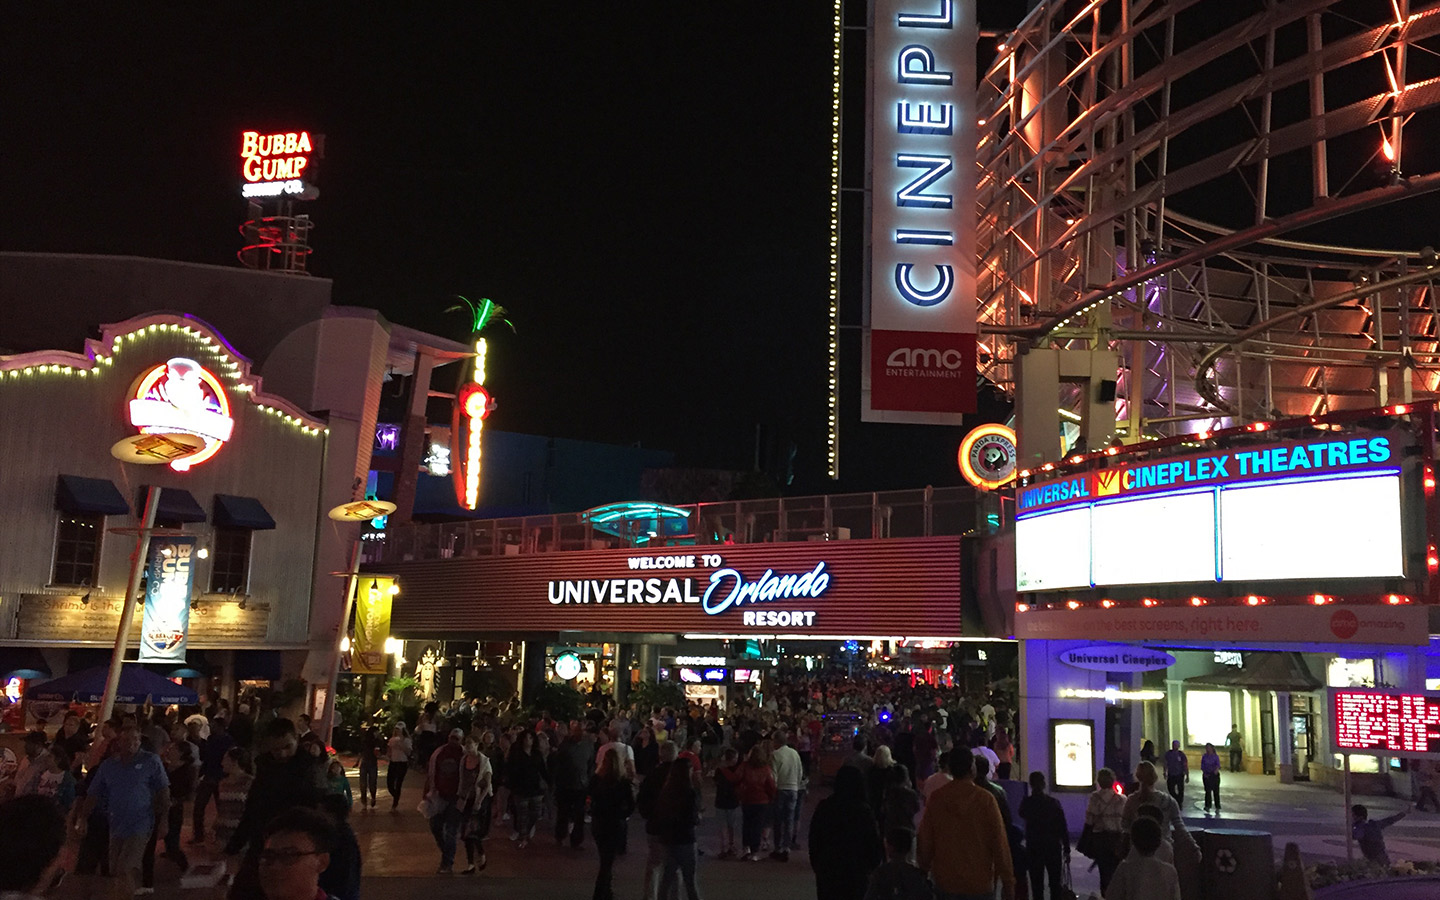 Take your date on an incredible night out at Universal CityWalk